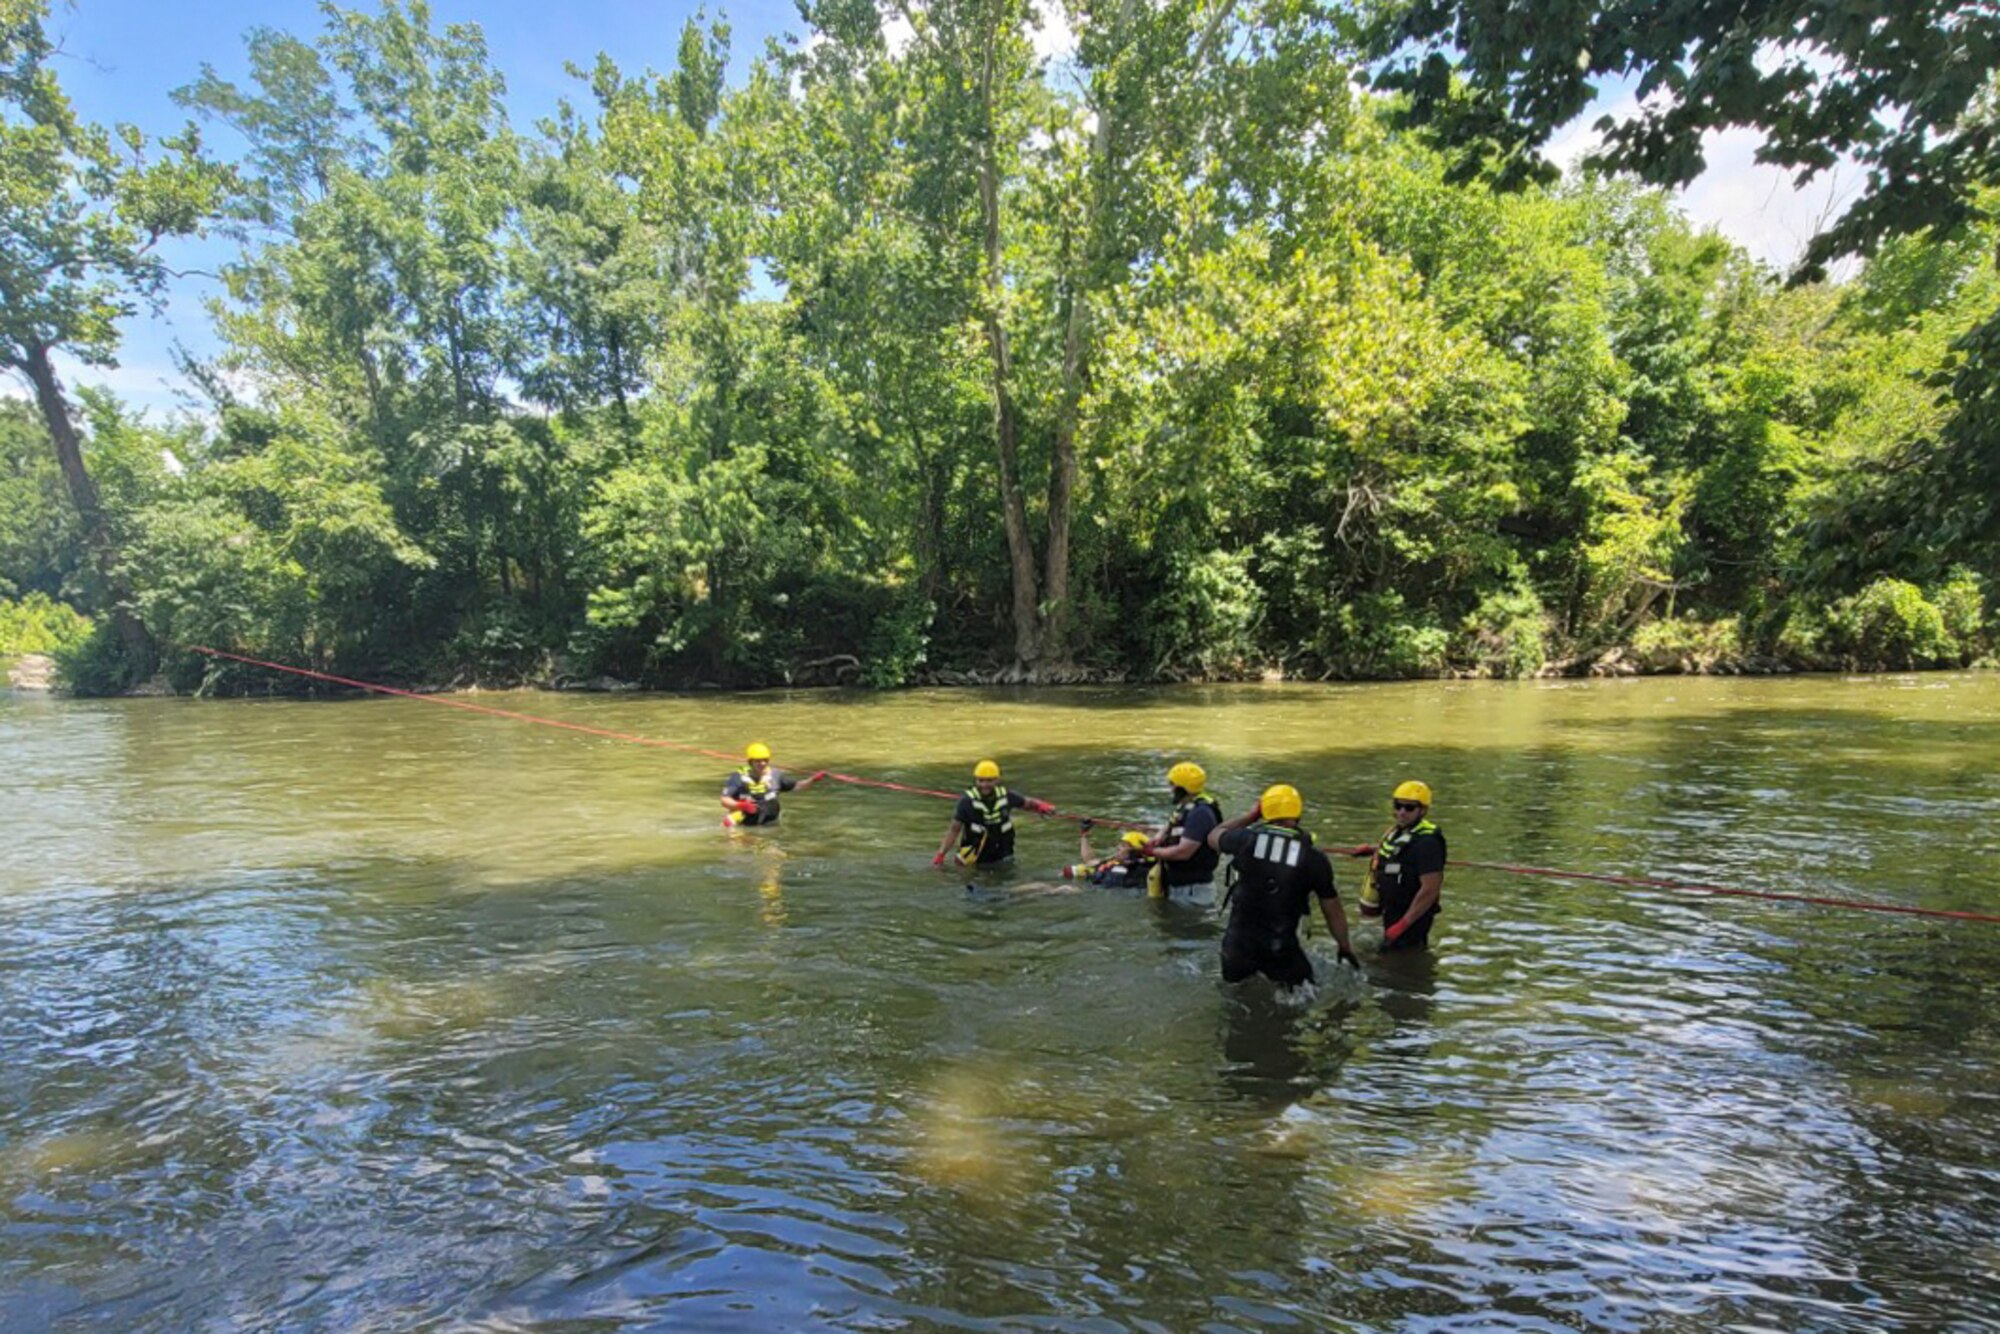 Firefighters assigned to the 167th Civil Engineering Squadron participate in swift water rescue training in Jefferson County, West Virginia, July 21, 2022. The Airmen learned how to operate rescue boats, navigate currents and apply rope saving techniques to rescue victims.